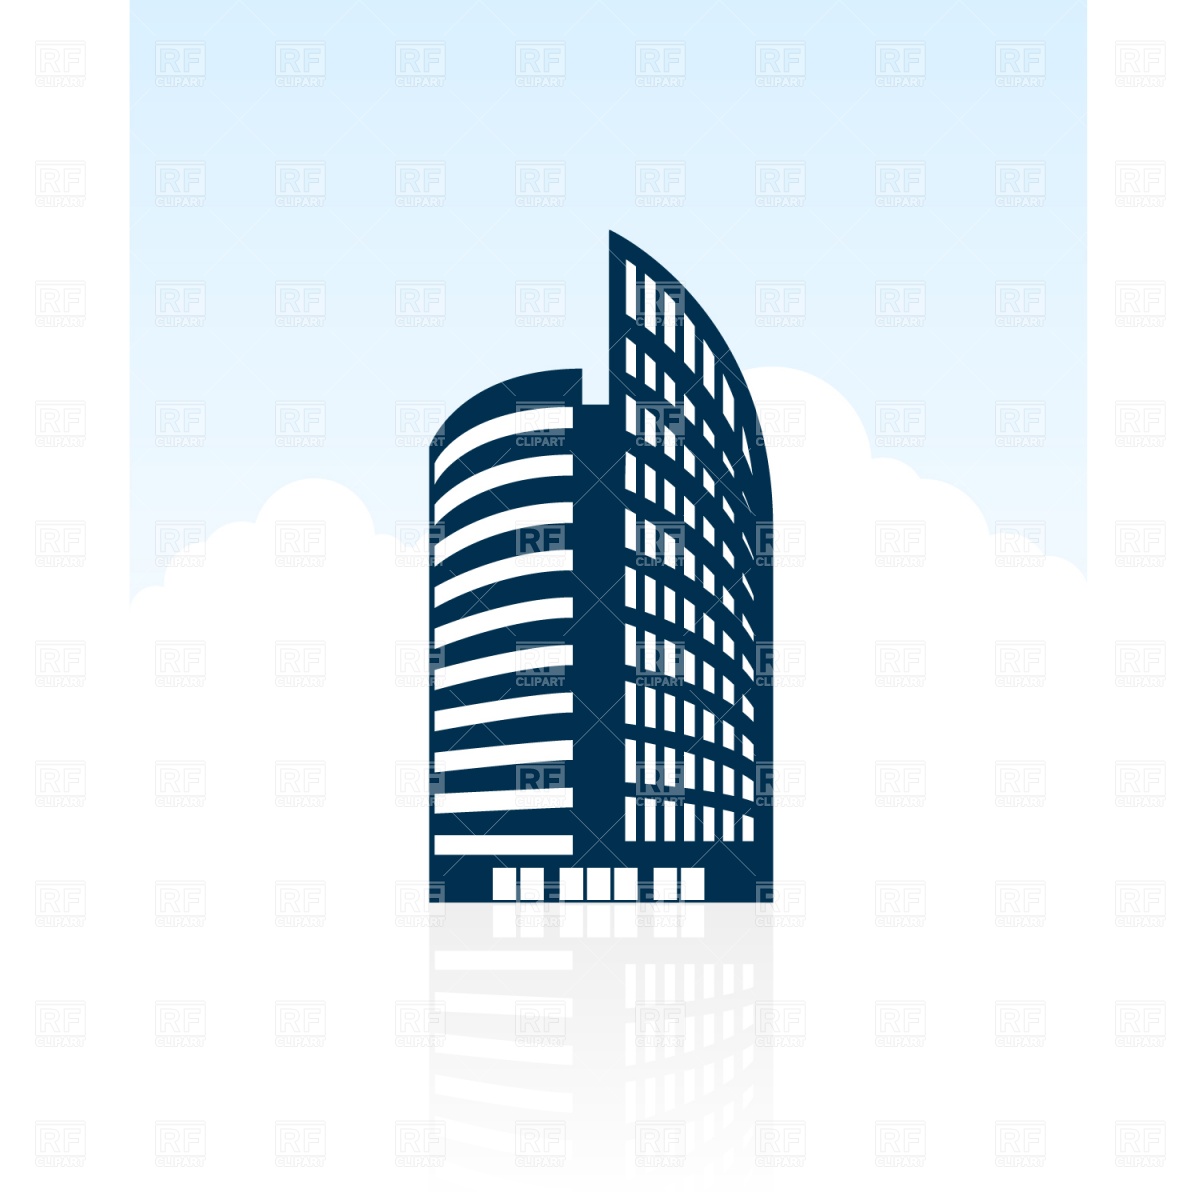 Building Silhouette Vector